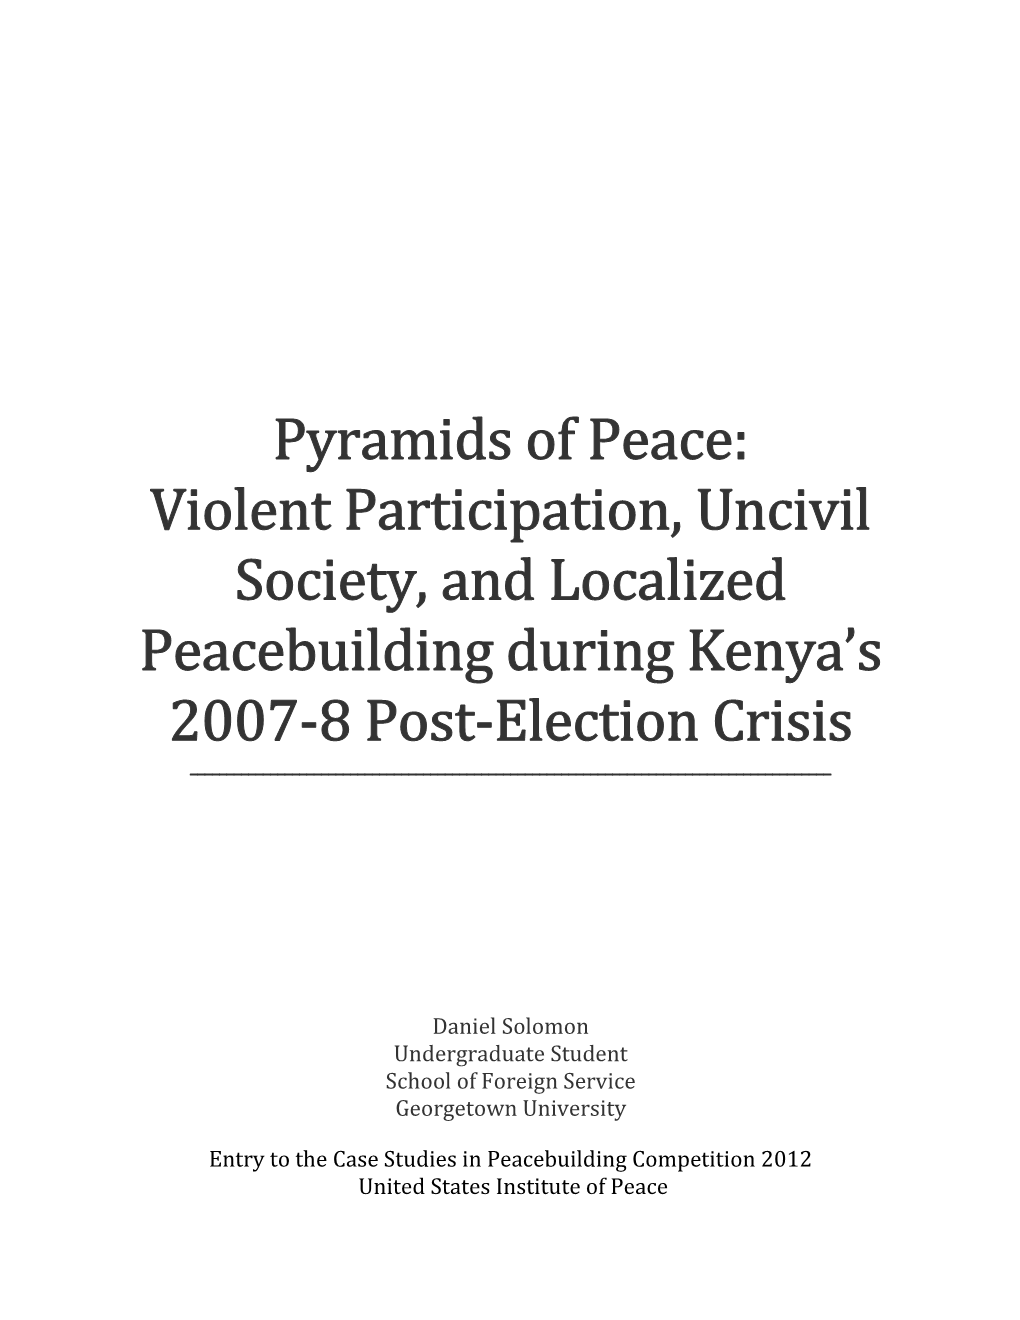 Pyramids of Peace: Violent Participation, Uncivil Society, and Localized Peacebuilding During Kenya’S 2007-8 Post-Election Crisis ______